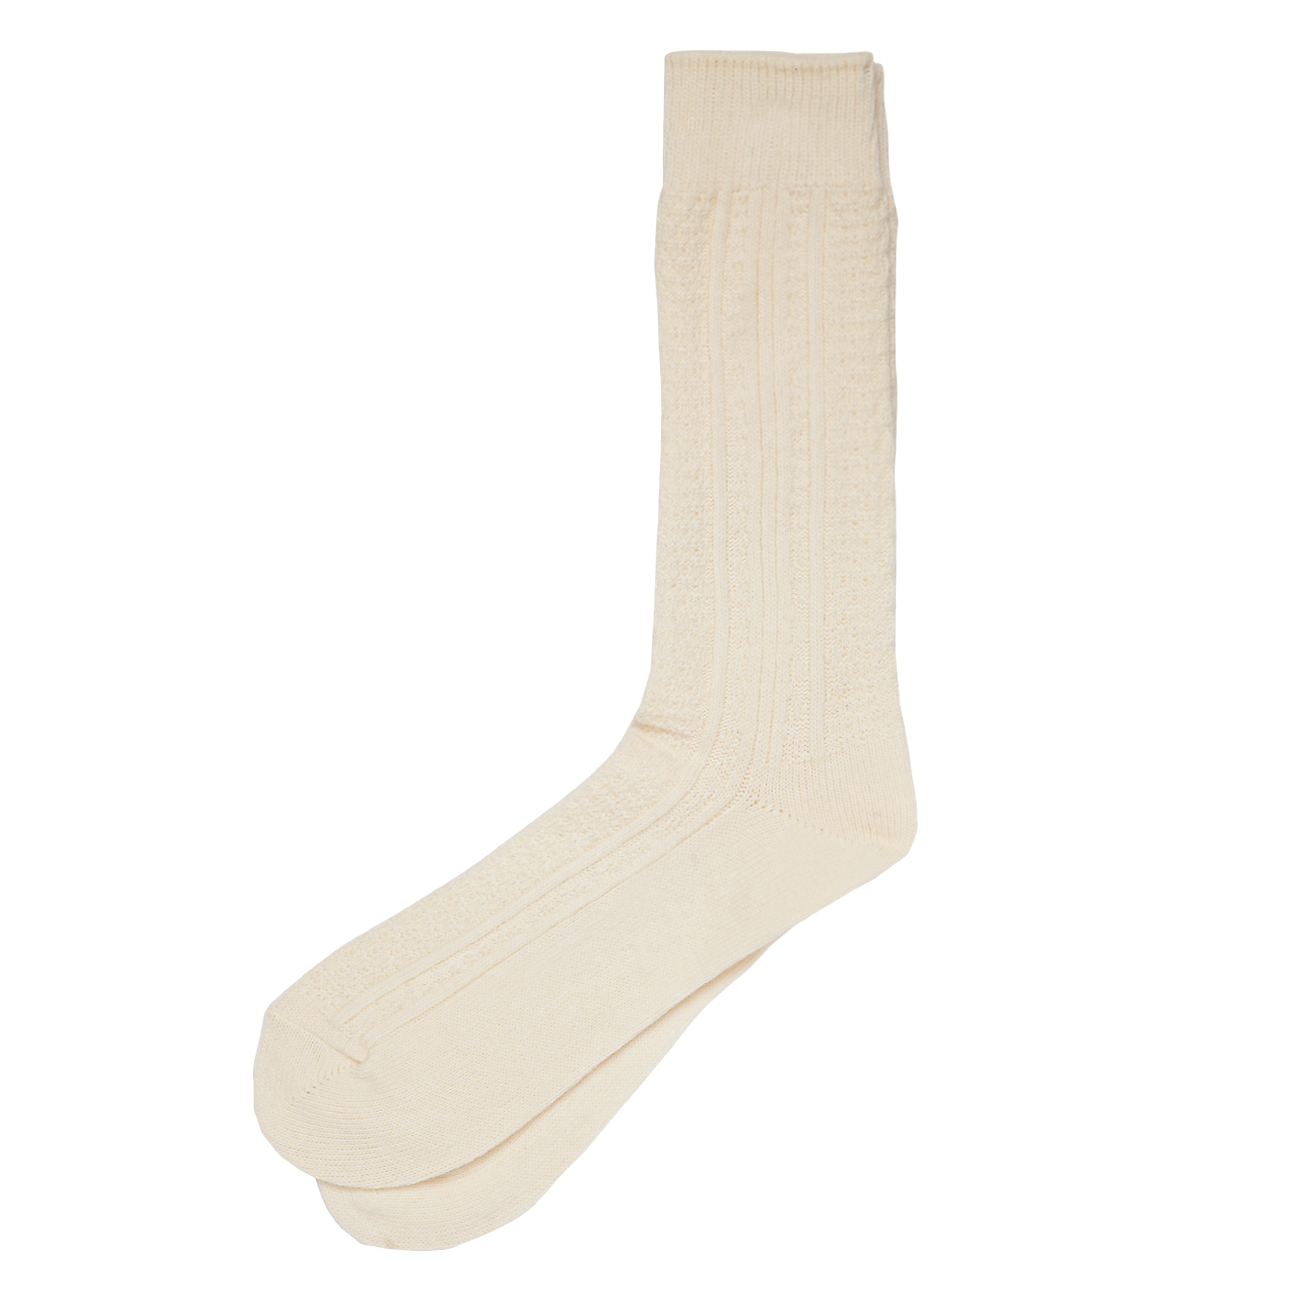 Cashmere Cable Knit Sock - Off White